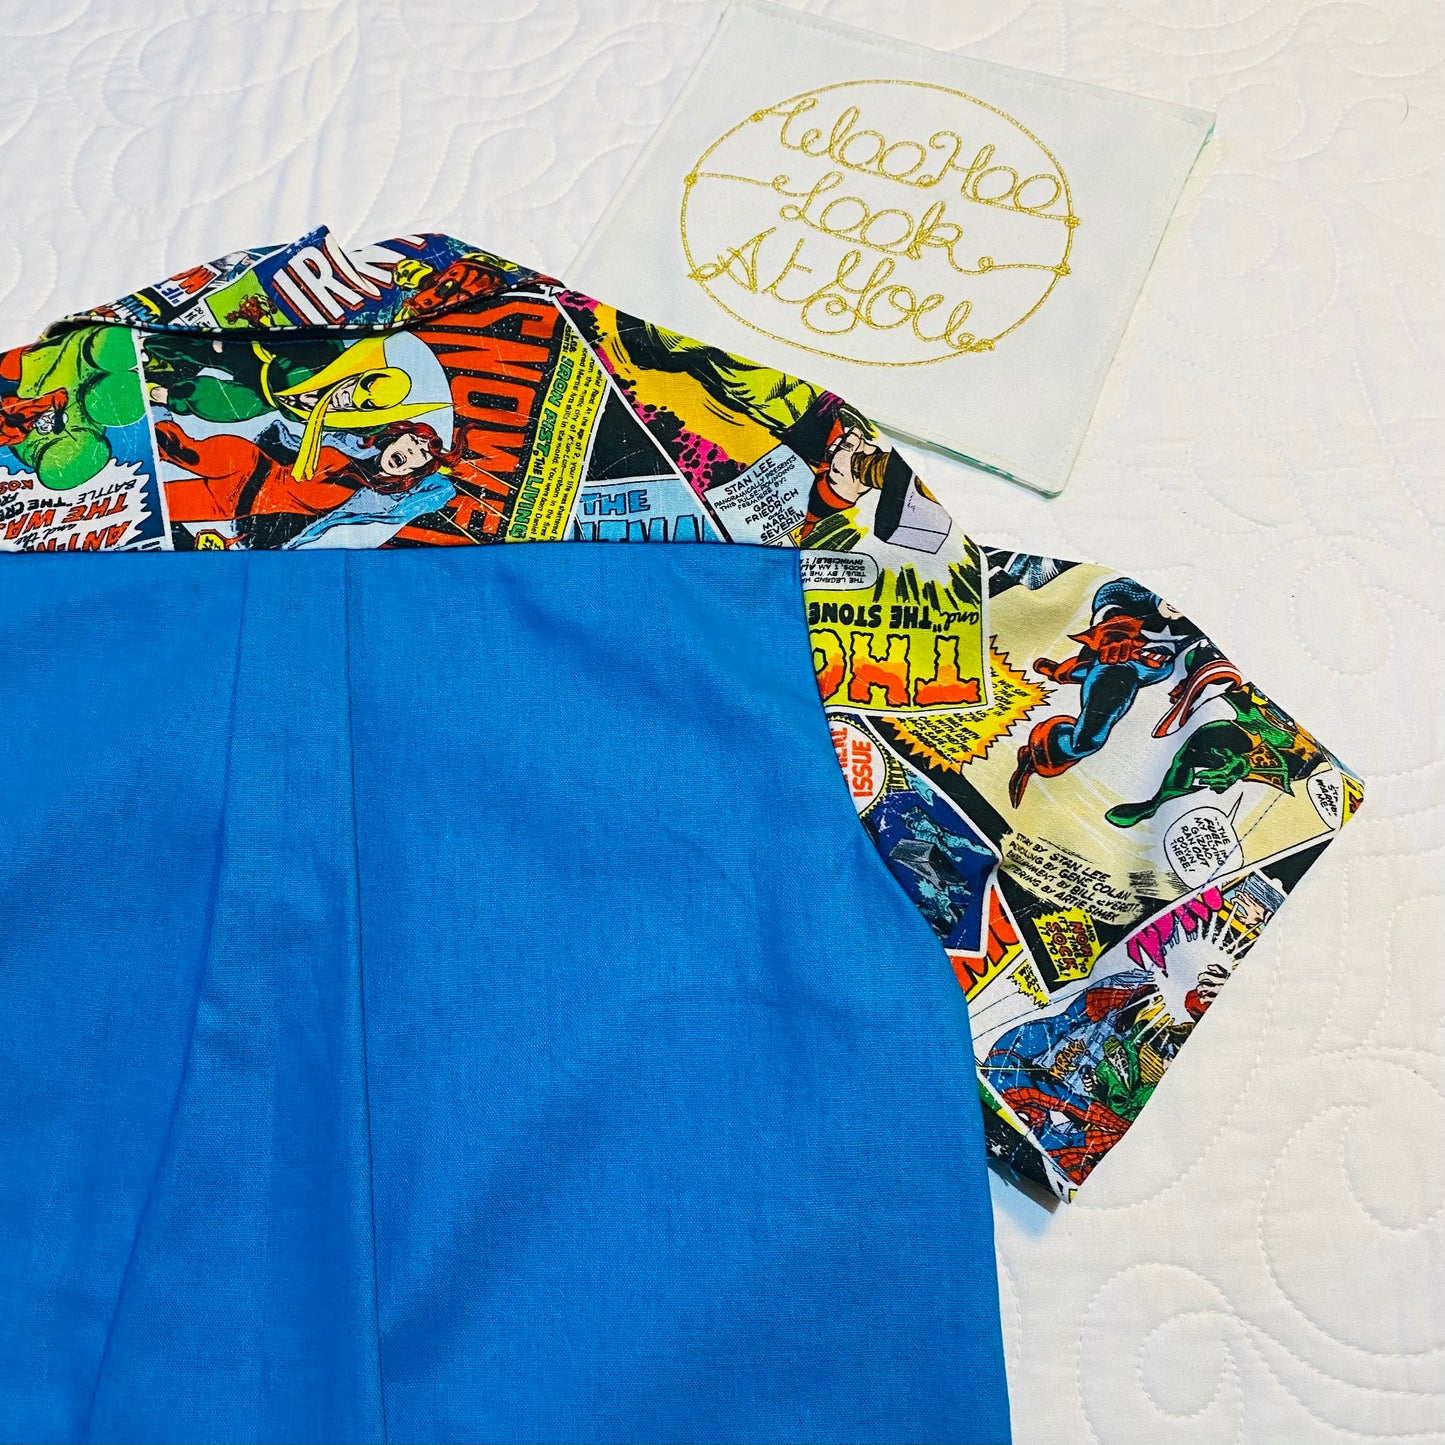 Shirt - Super Hero Comics - Light Blue Front and Back with Contrasting Comic Pocket